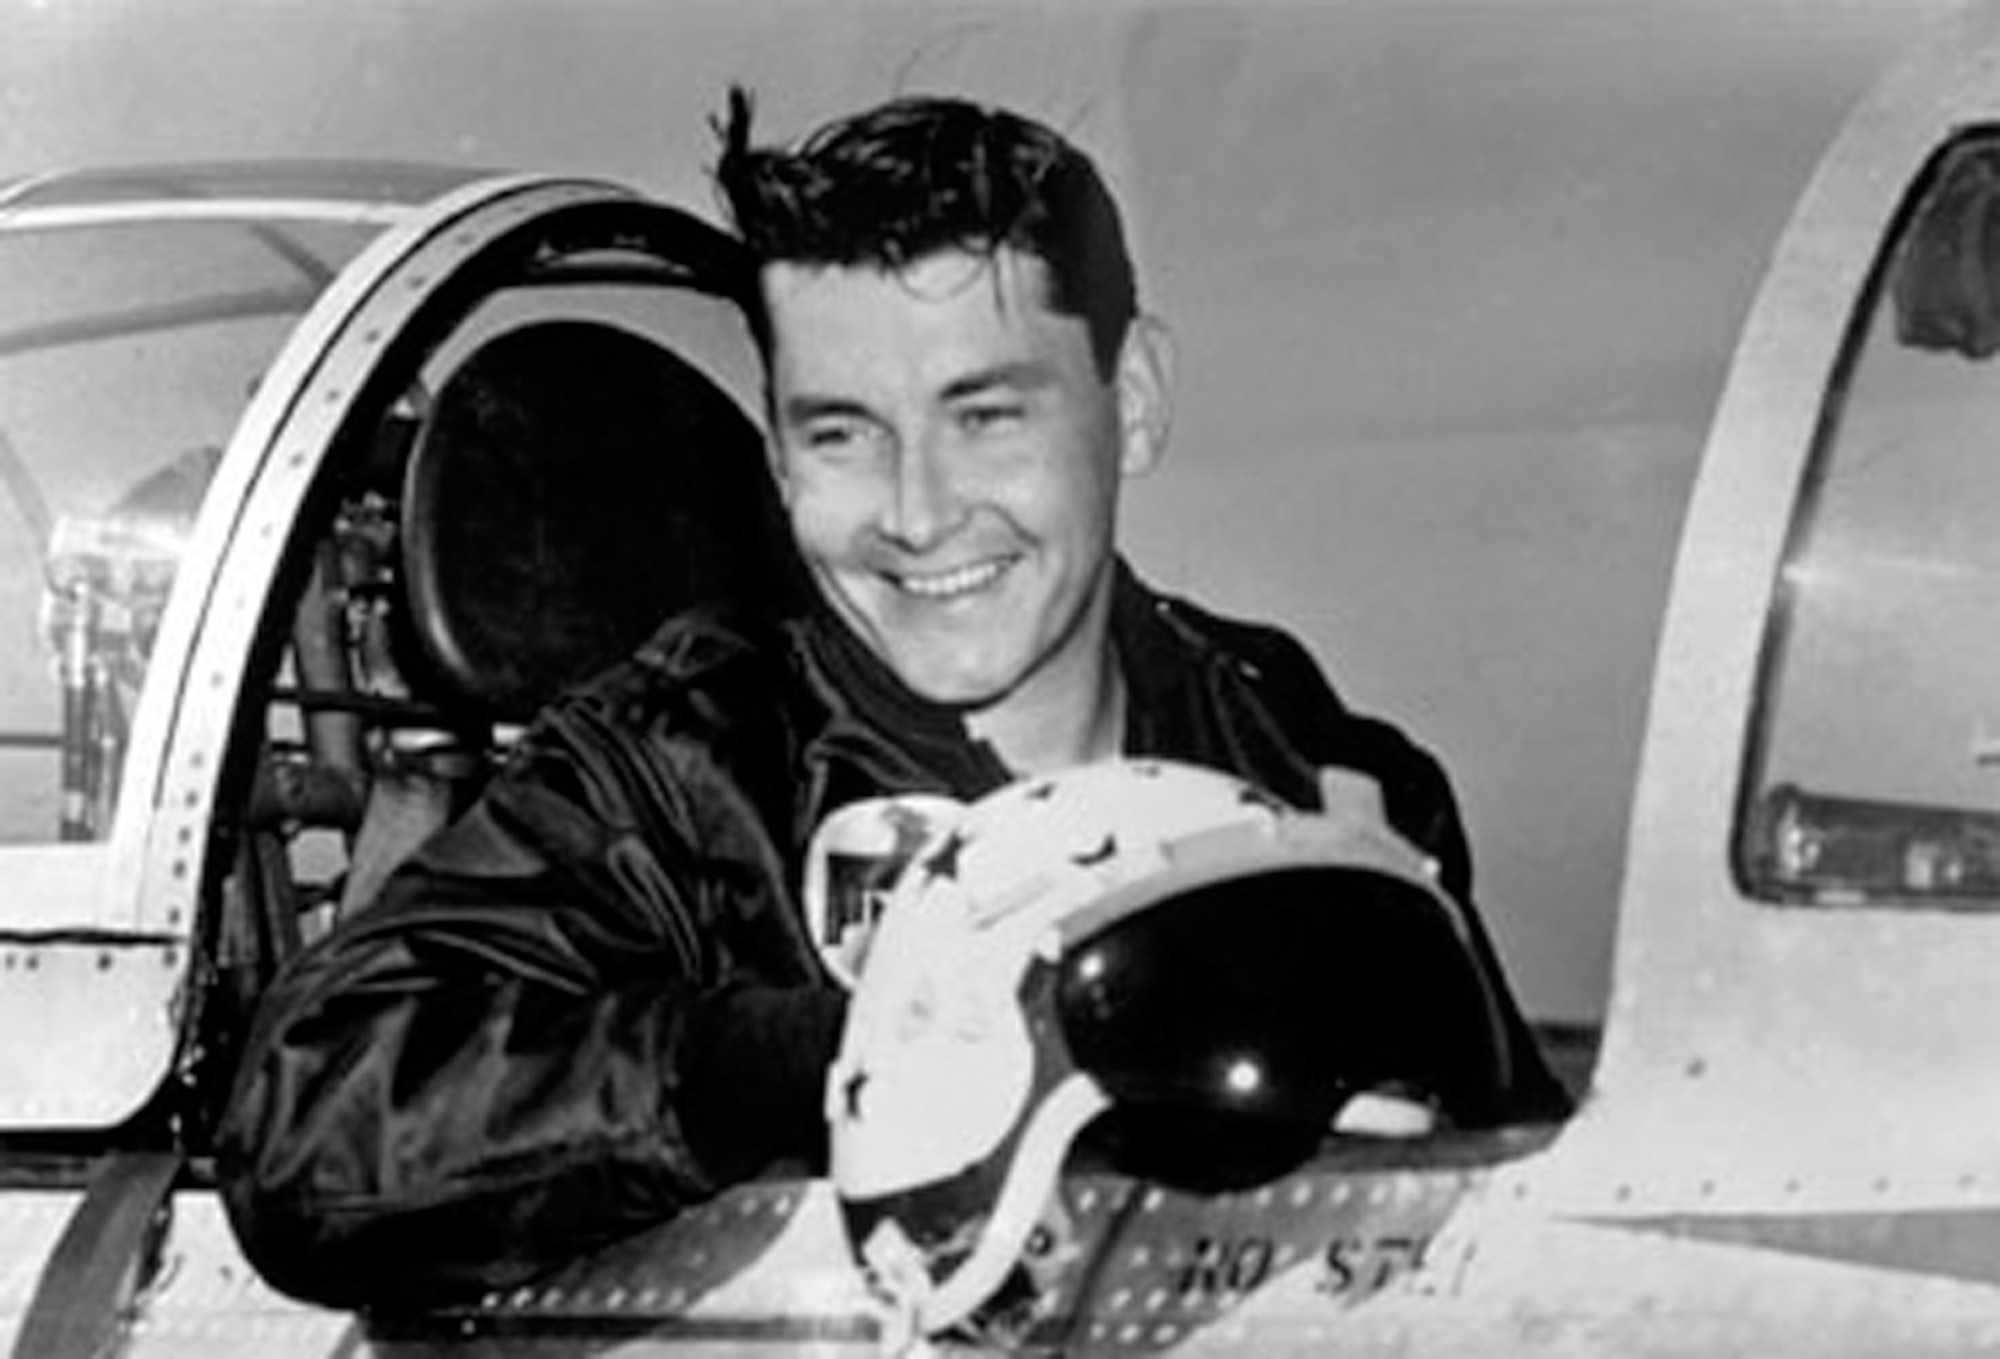 After proving his flying skill in Korea as a flight commander, Gen. Wilbur "Bill" Creech began flying F-84s with the U.S. Air Force Demonstration Squadron, the Thunderbirds, in 1953. He later commanded United States Air Forces in Europe's Skyblazers team. (Courtesy photo)